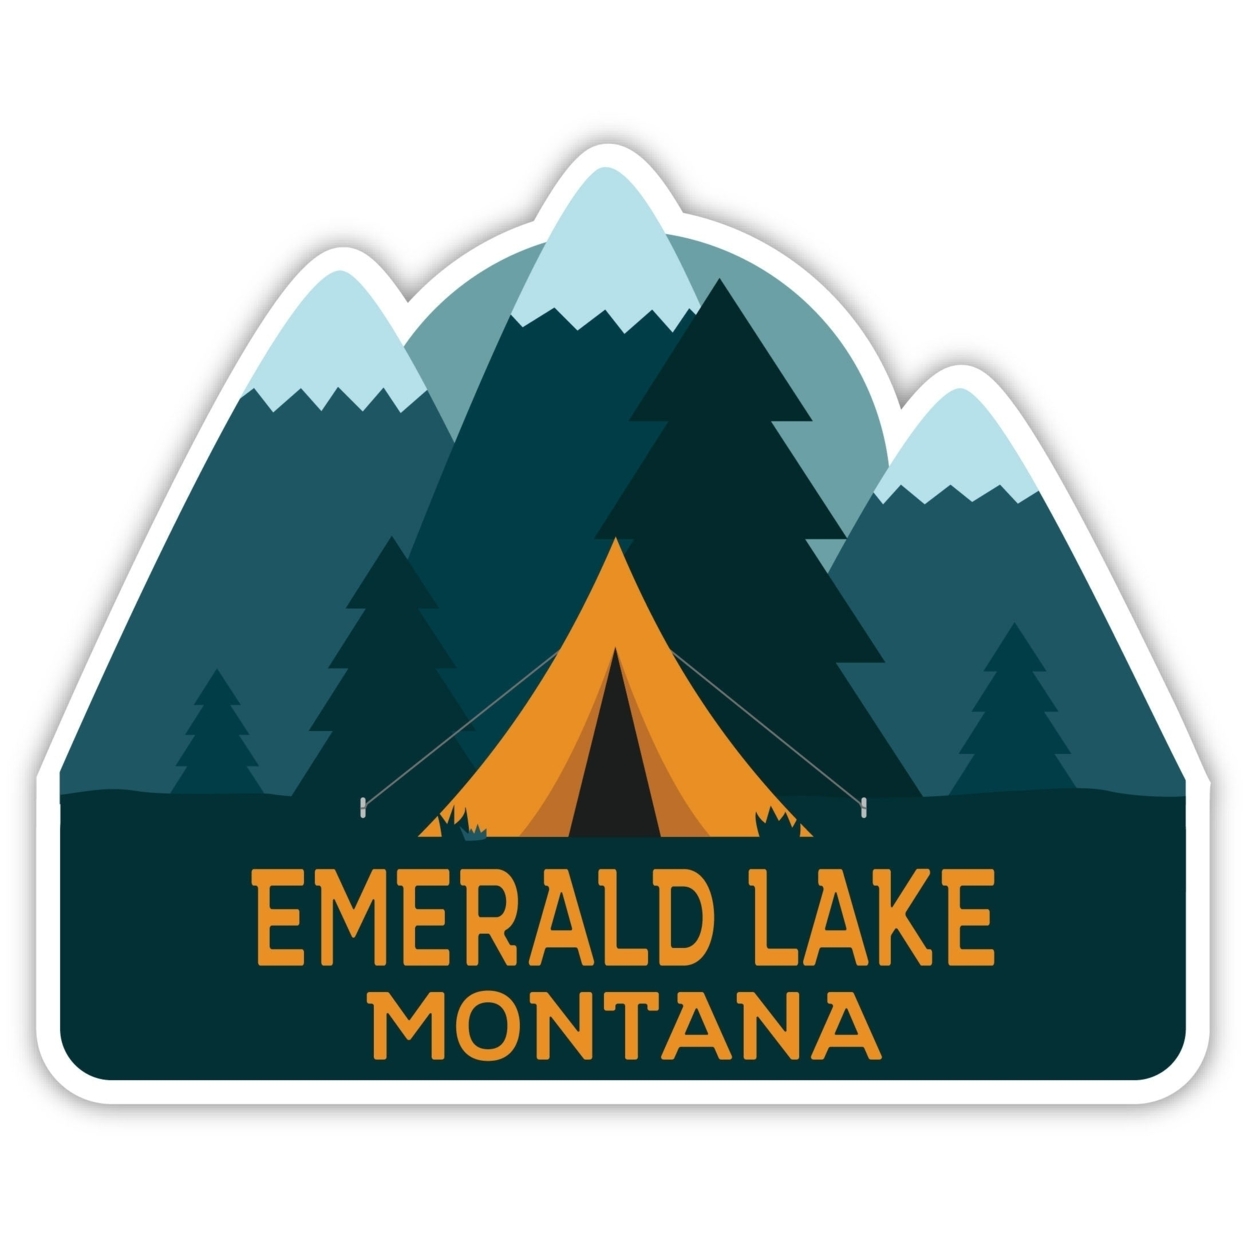 Emerald Lake Montana Souvenir Decorative Stickers (Choose Theme And Size) - 4-Pack, 10-Inch, Tent